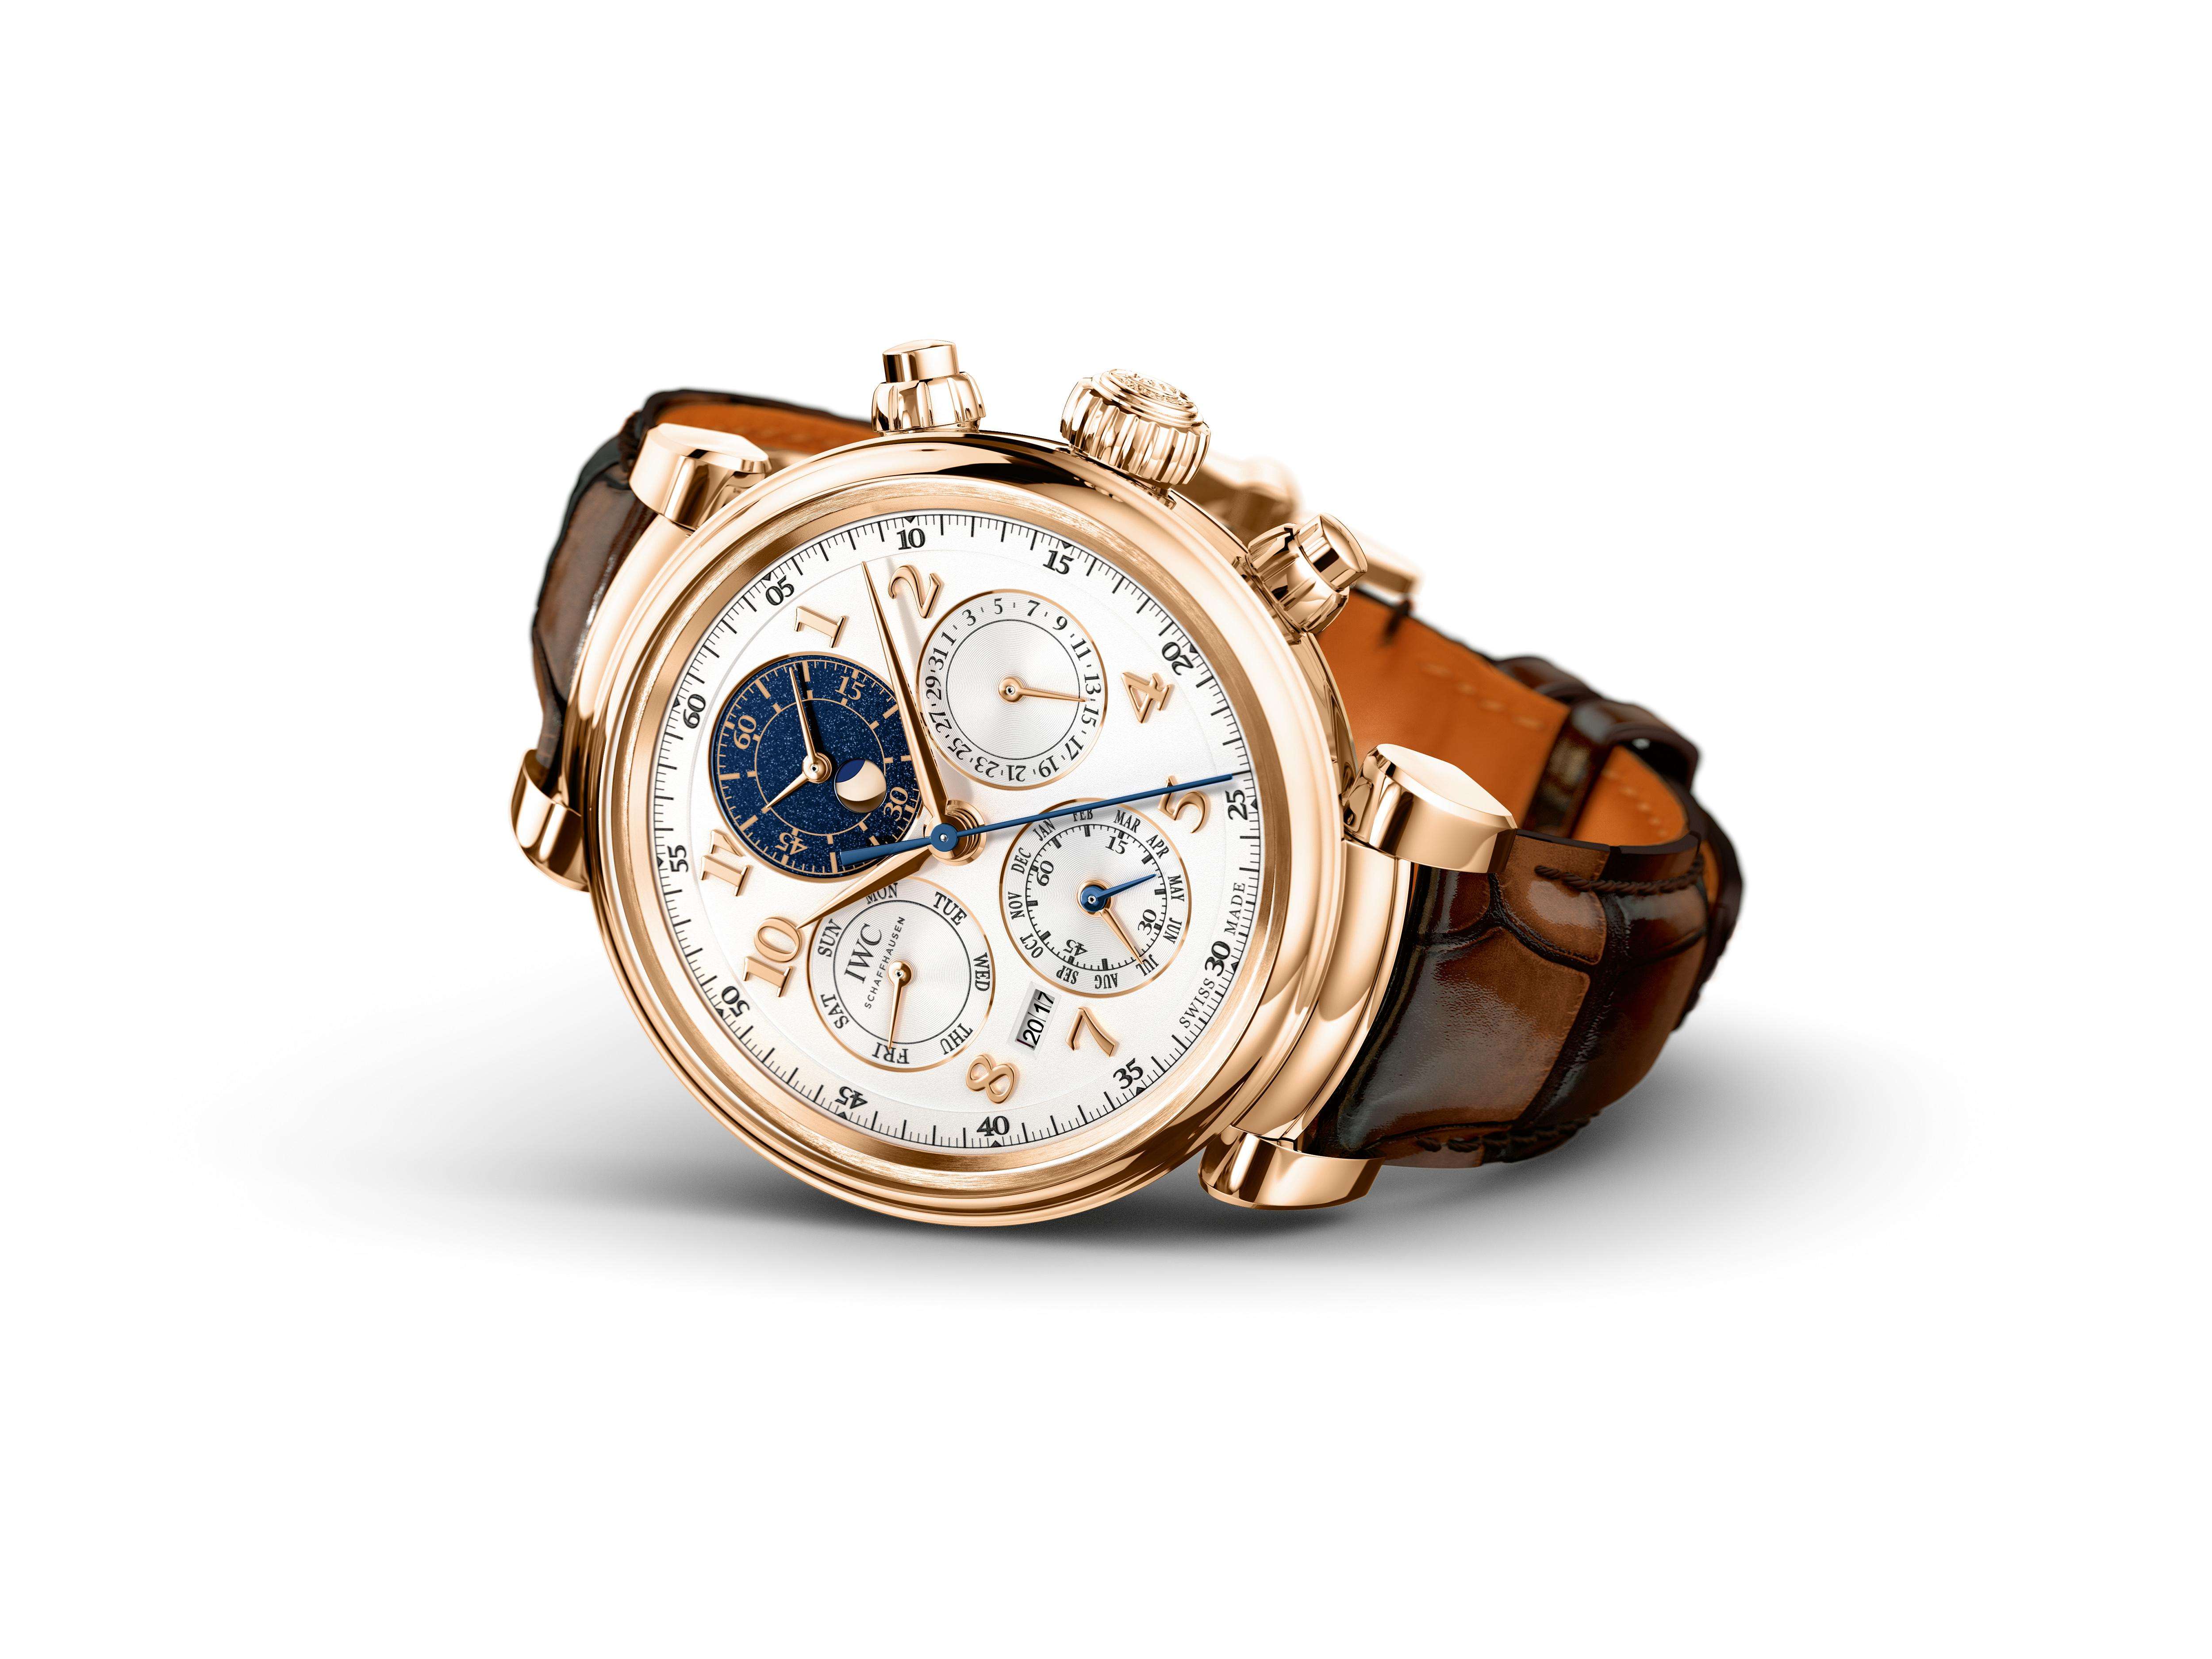 New novelties from Audemars Piguet, Roger Dubuis, HYT, IWC, Panerai and Jaeger LeCoultre are sure to impress